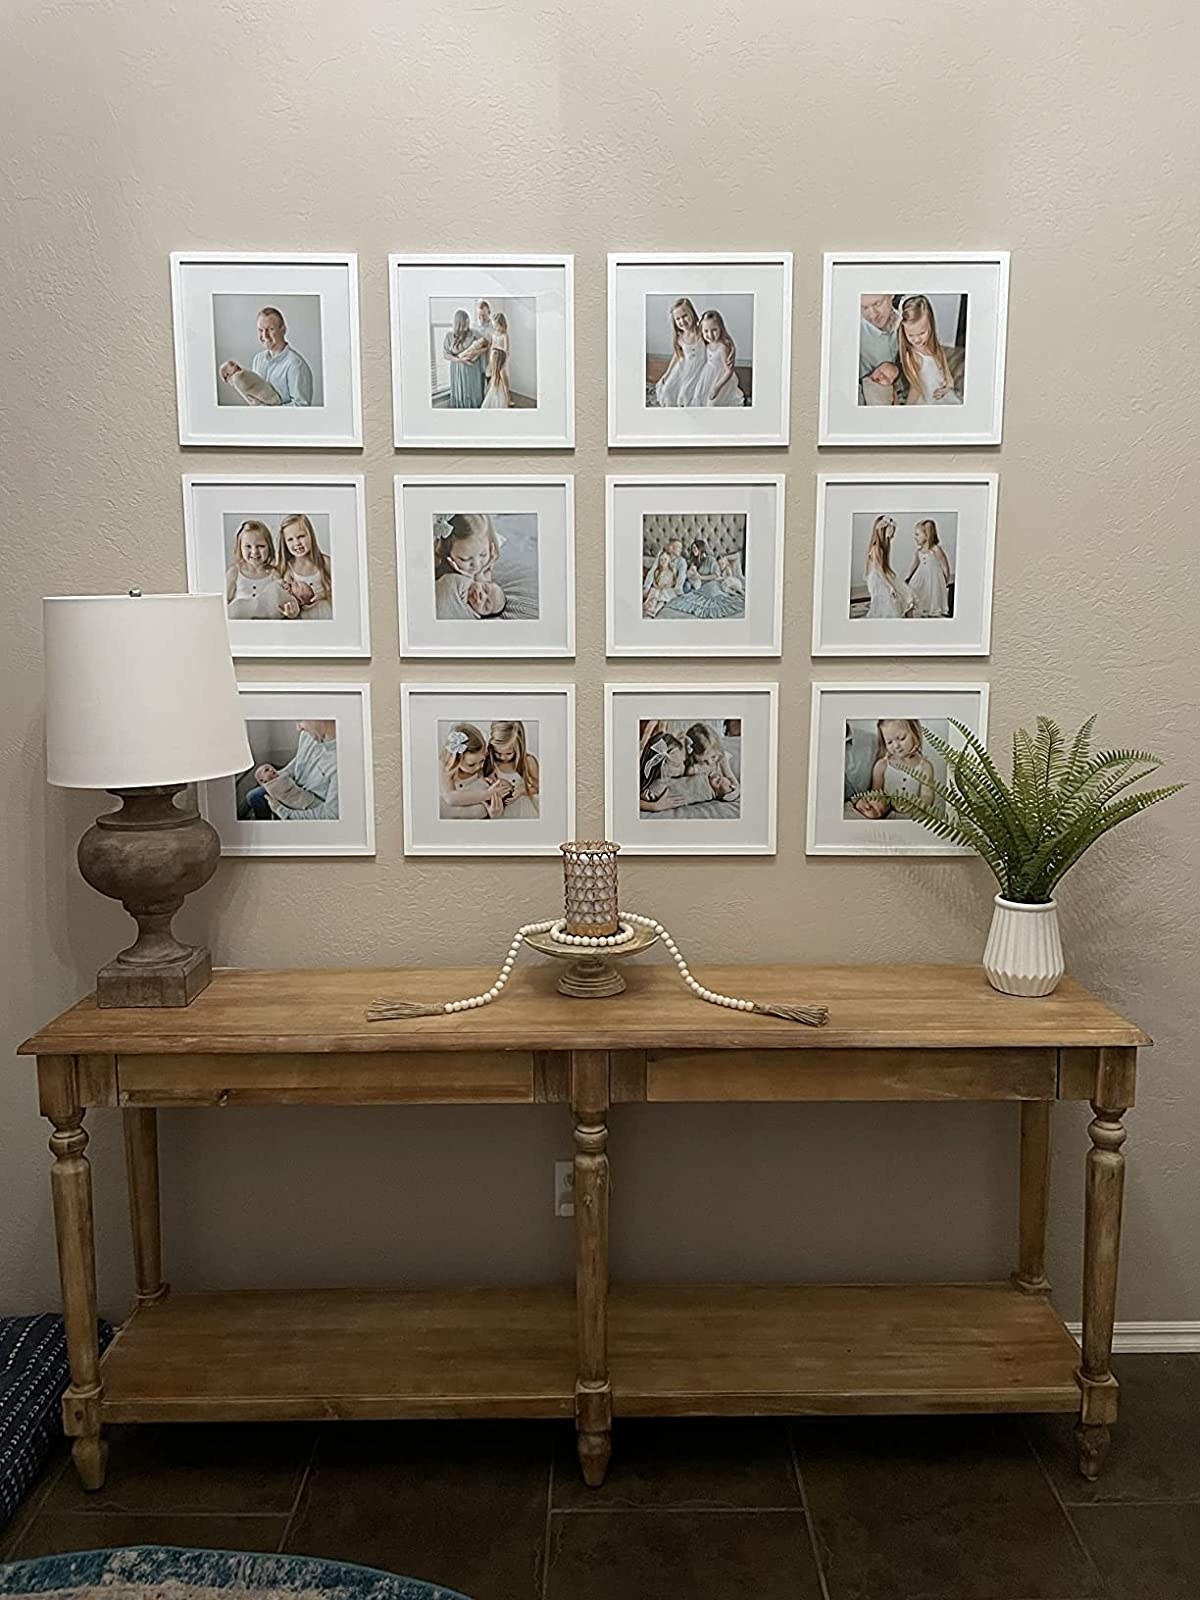 Reviewer image of frames above a console table